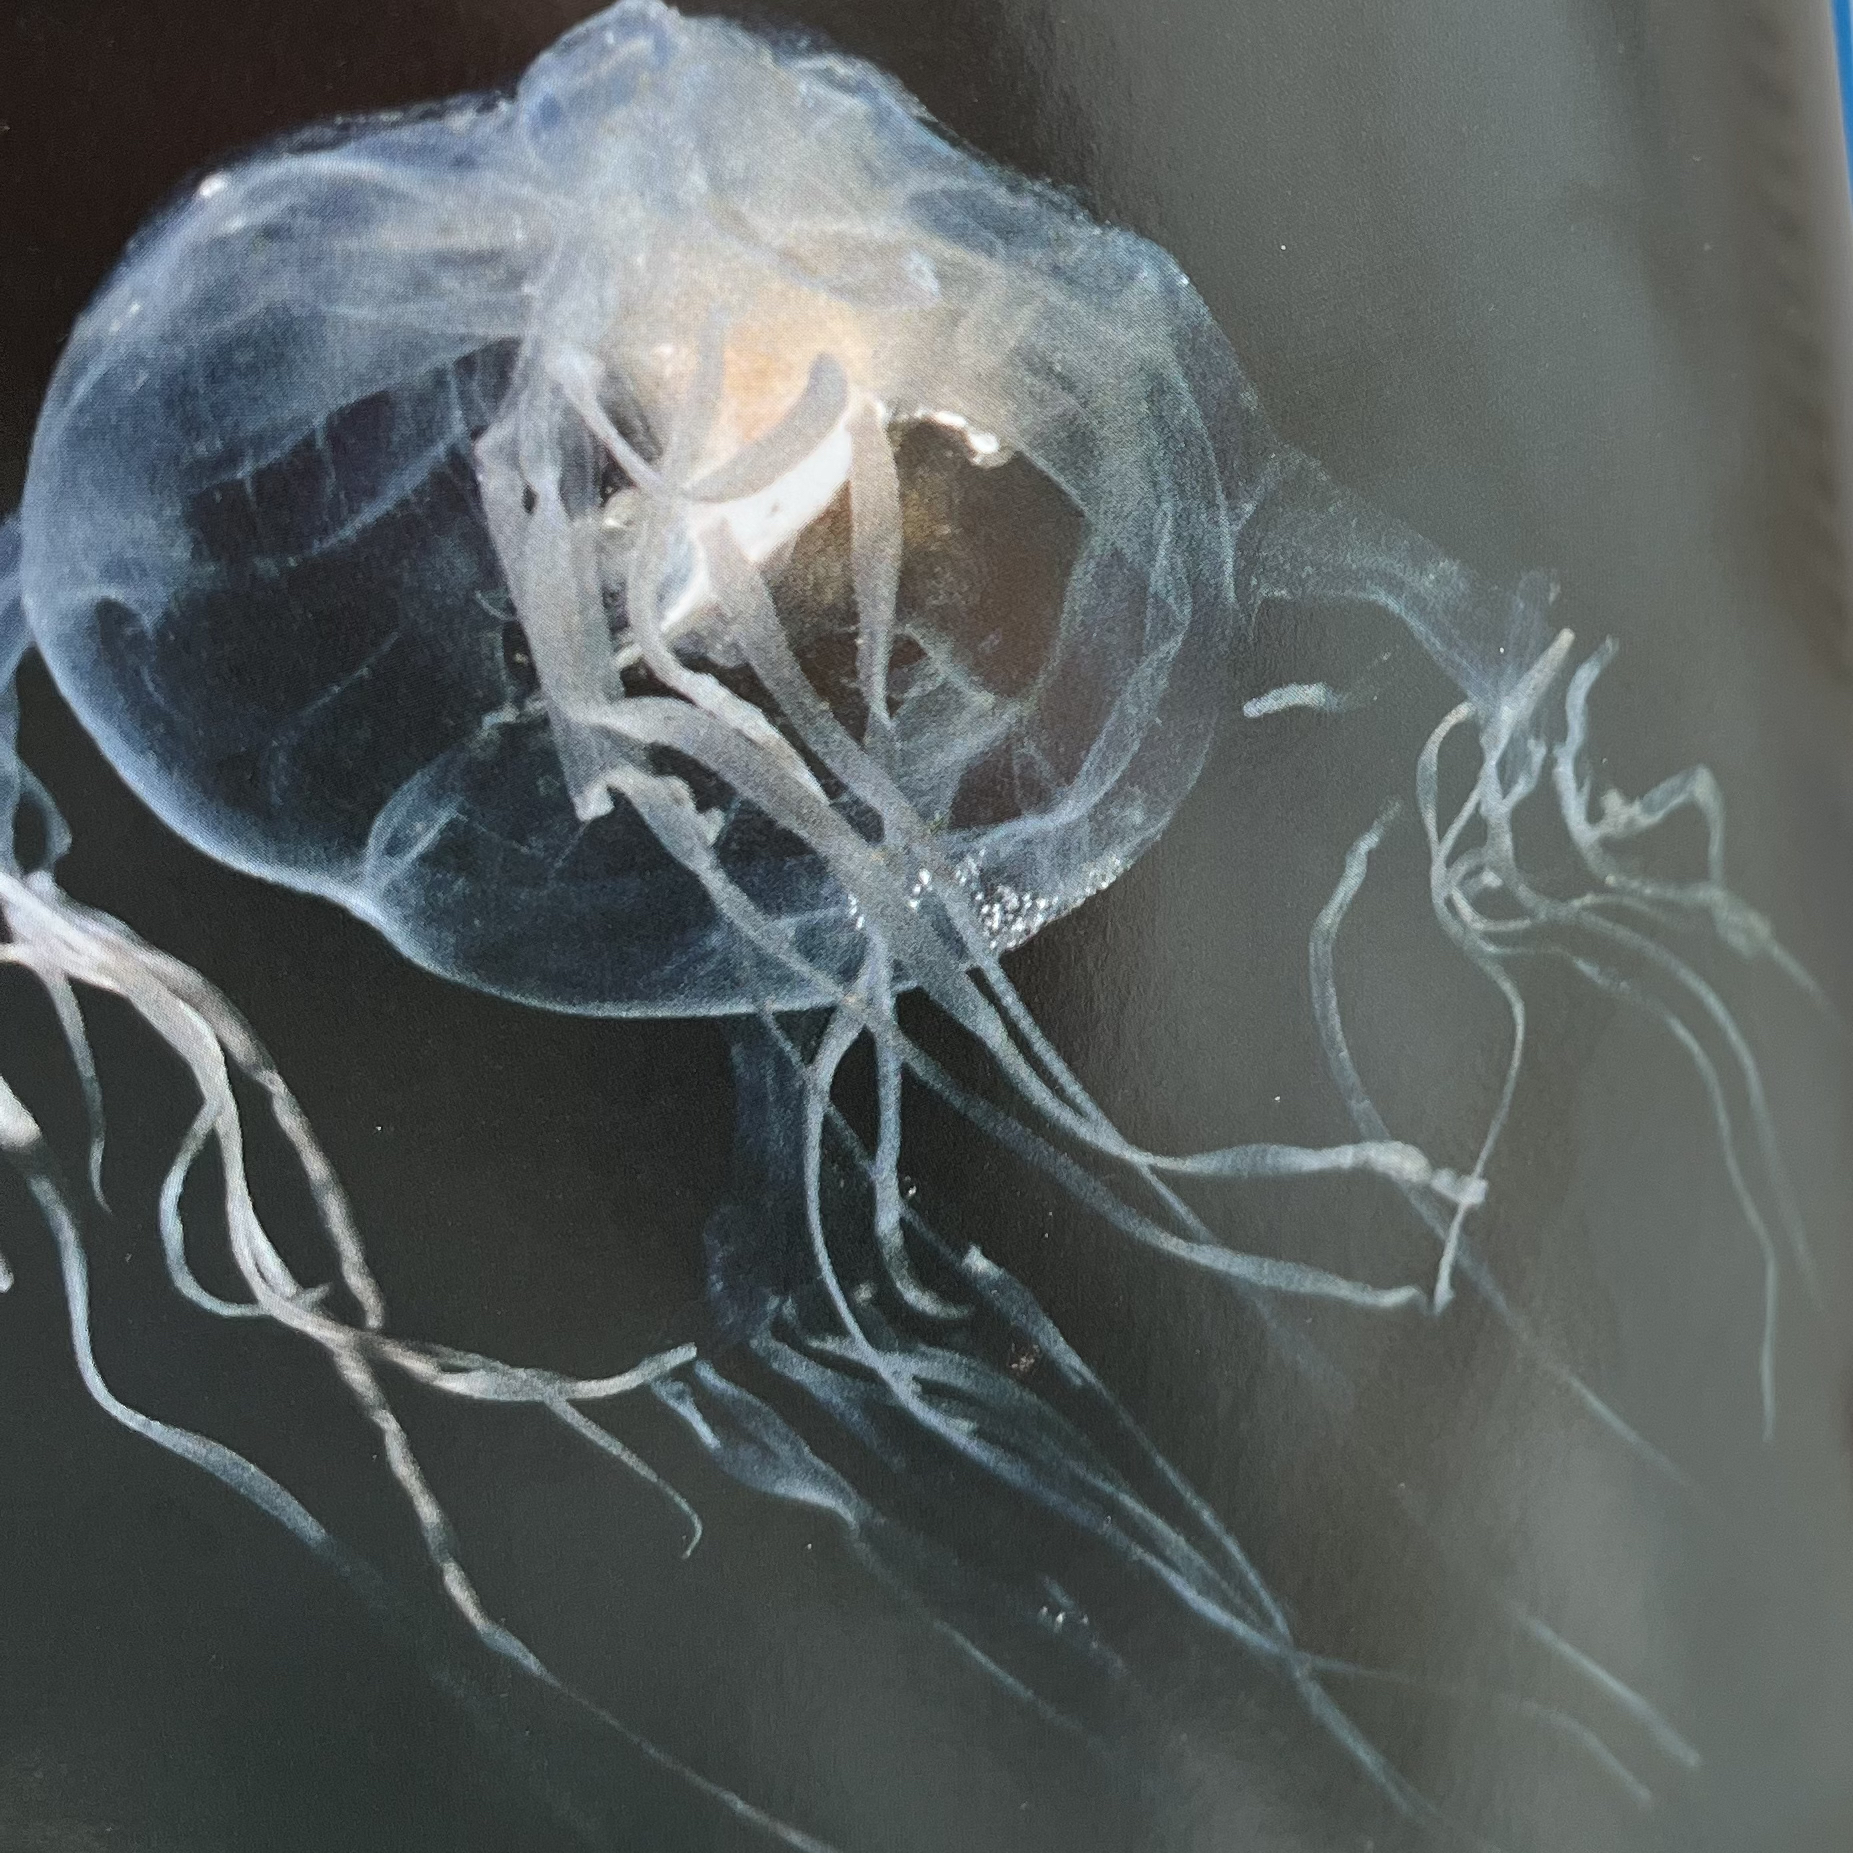 A photo of a jellyfish